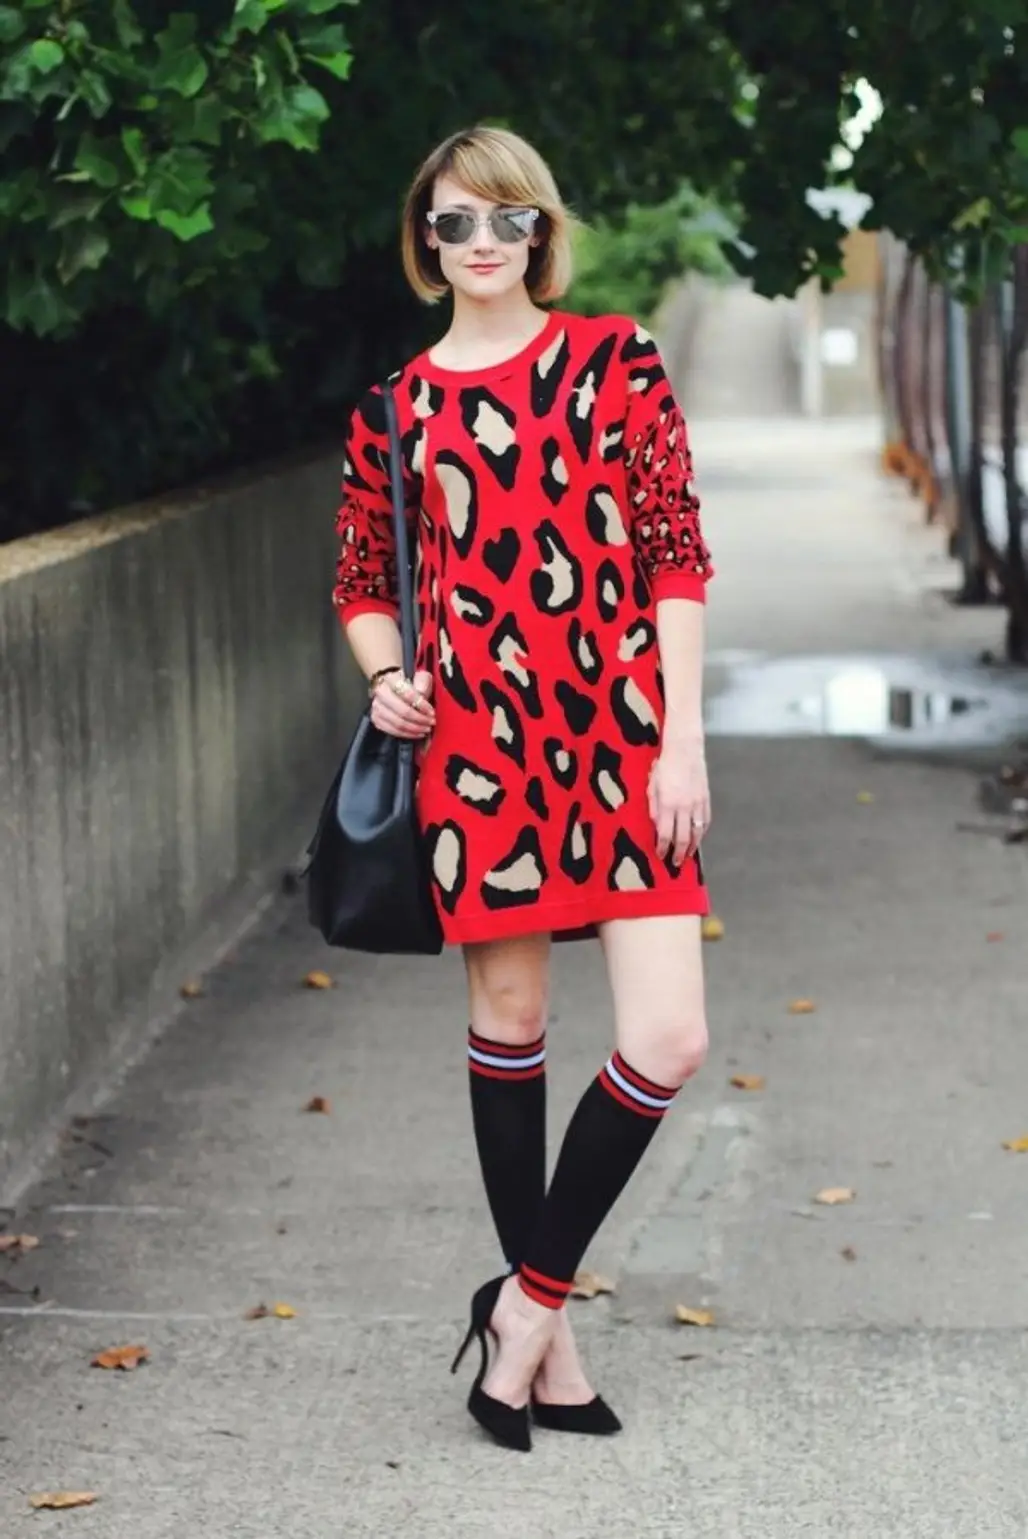 With a Printed Sweater Dress